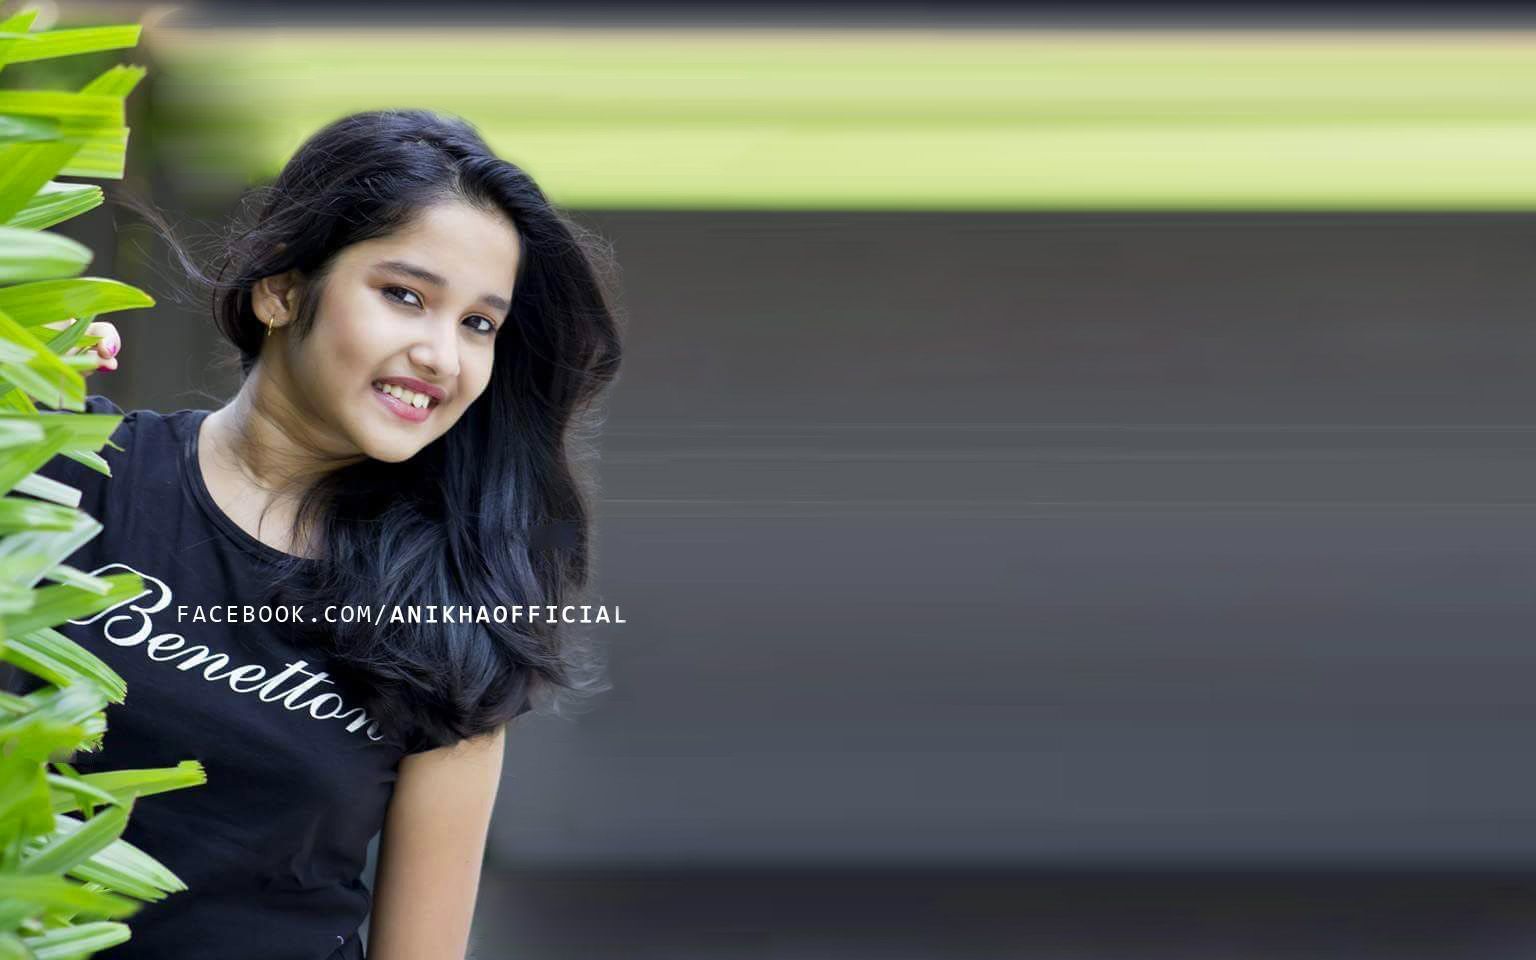 1536x960 Anikha Surendran Photo Wallpaper In 2022 Photo Wallpaper Girl Photography Poses Cute Baby Girl Picture